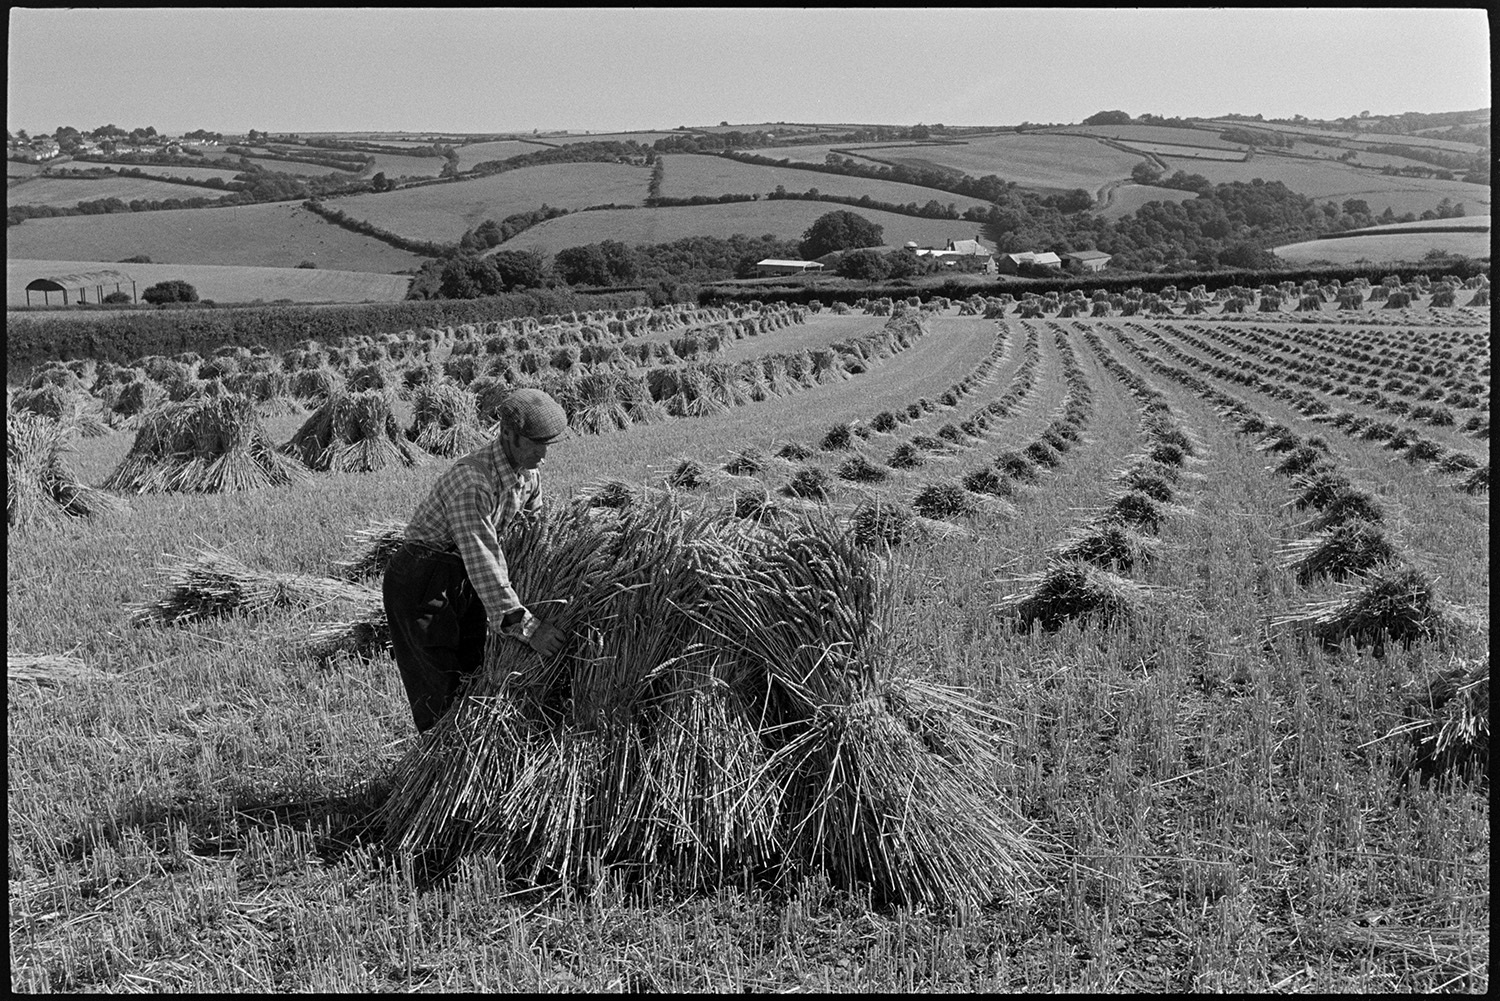 Men setting up stooks.<br />
[A man setting up stooks of corn in a field at Spittle, Chulmleigh, with a view of surrounding fields, hedgerows and farm buildings in the background.]